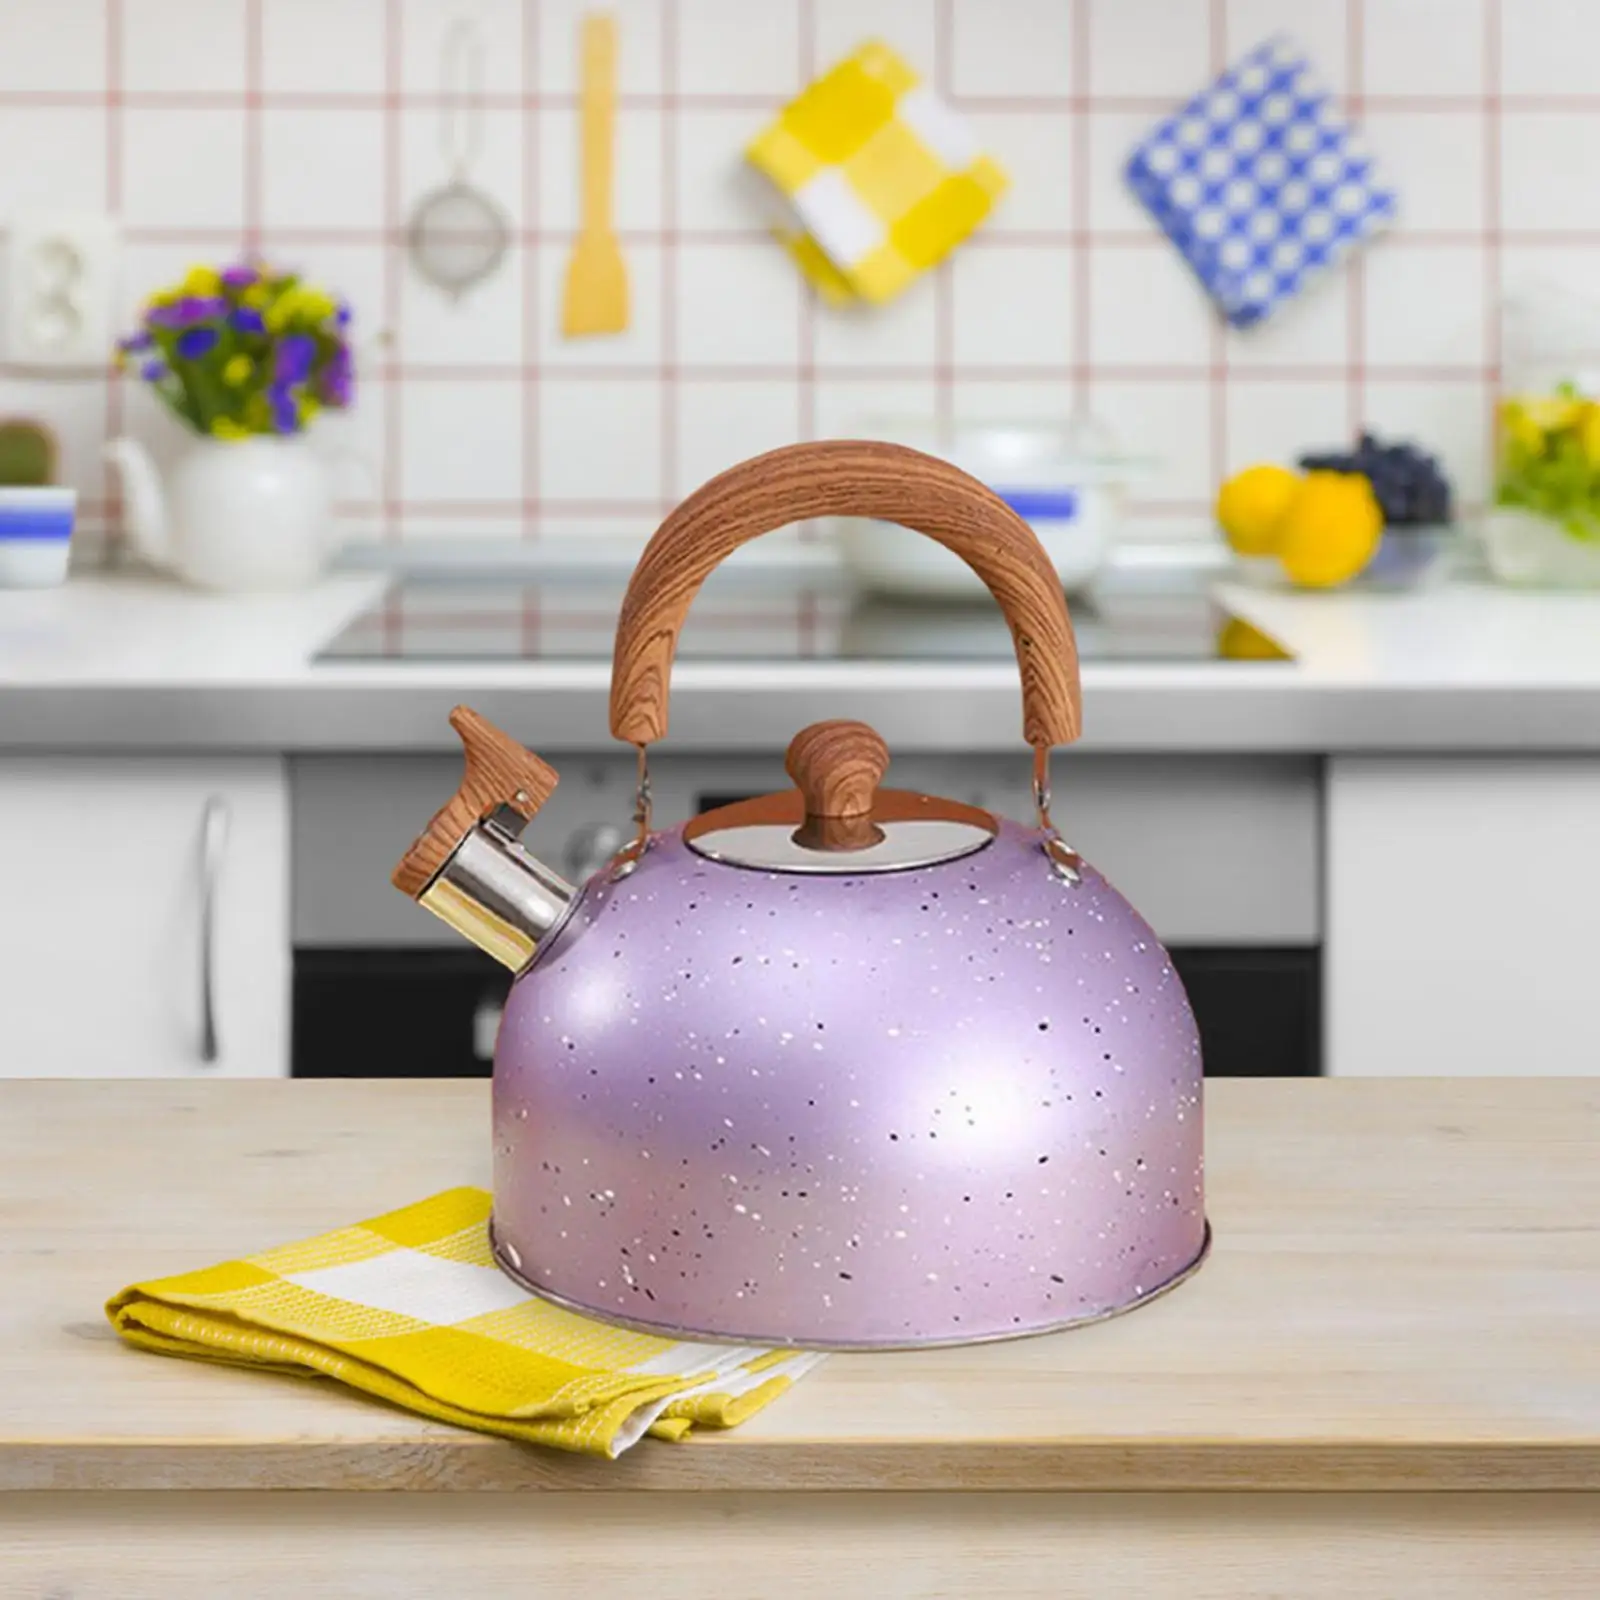 Whistle tea Kettle for Stove Top with Wood Handle Tea Pots for Boiling water Source